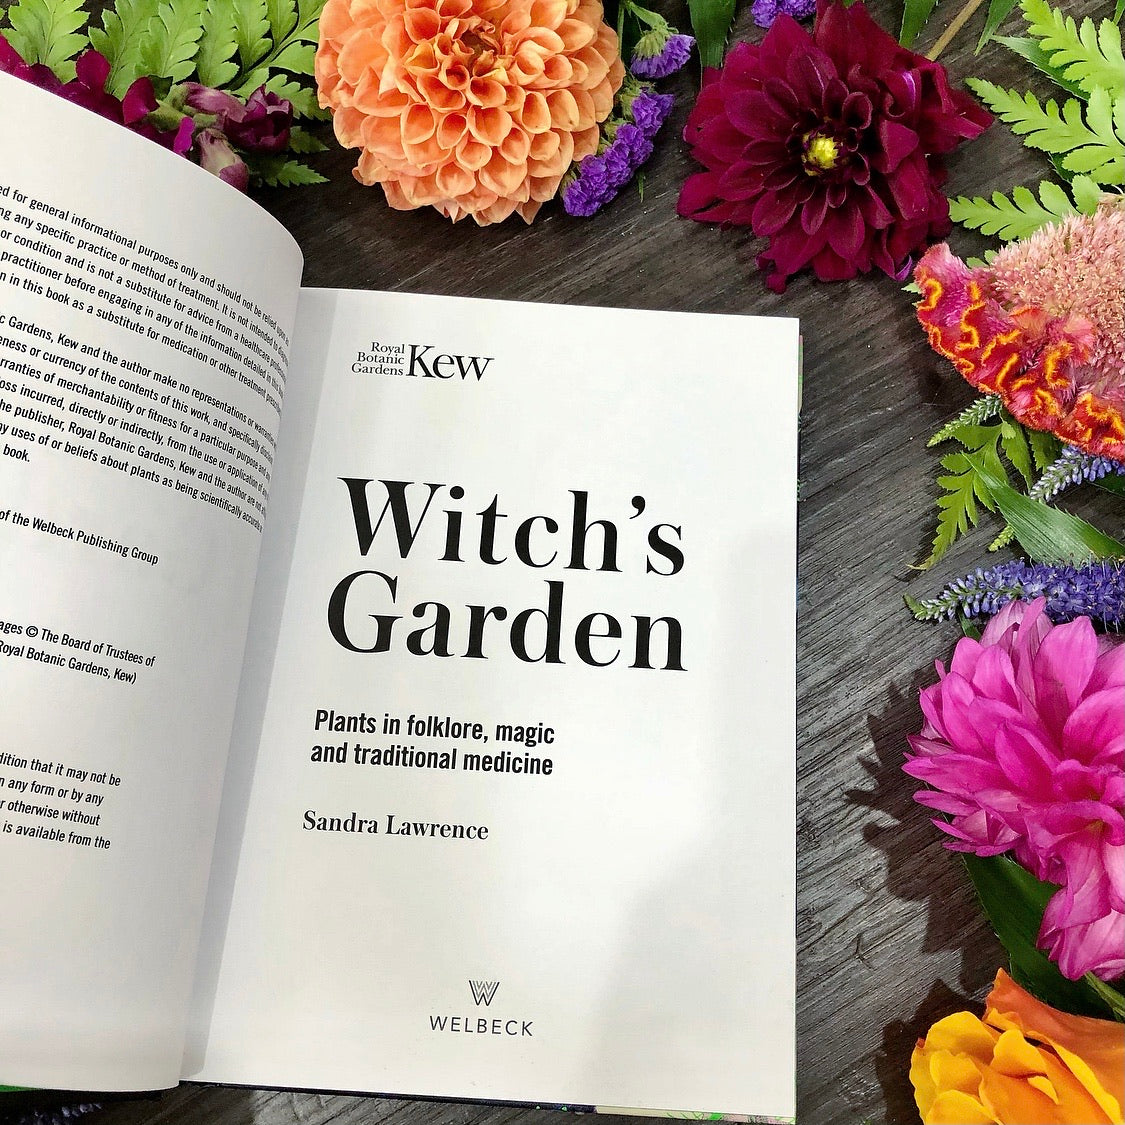 The Witch’s Garden